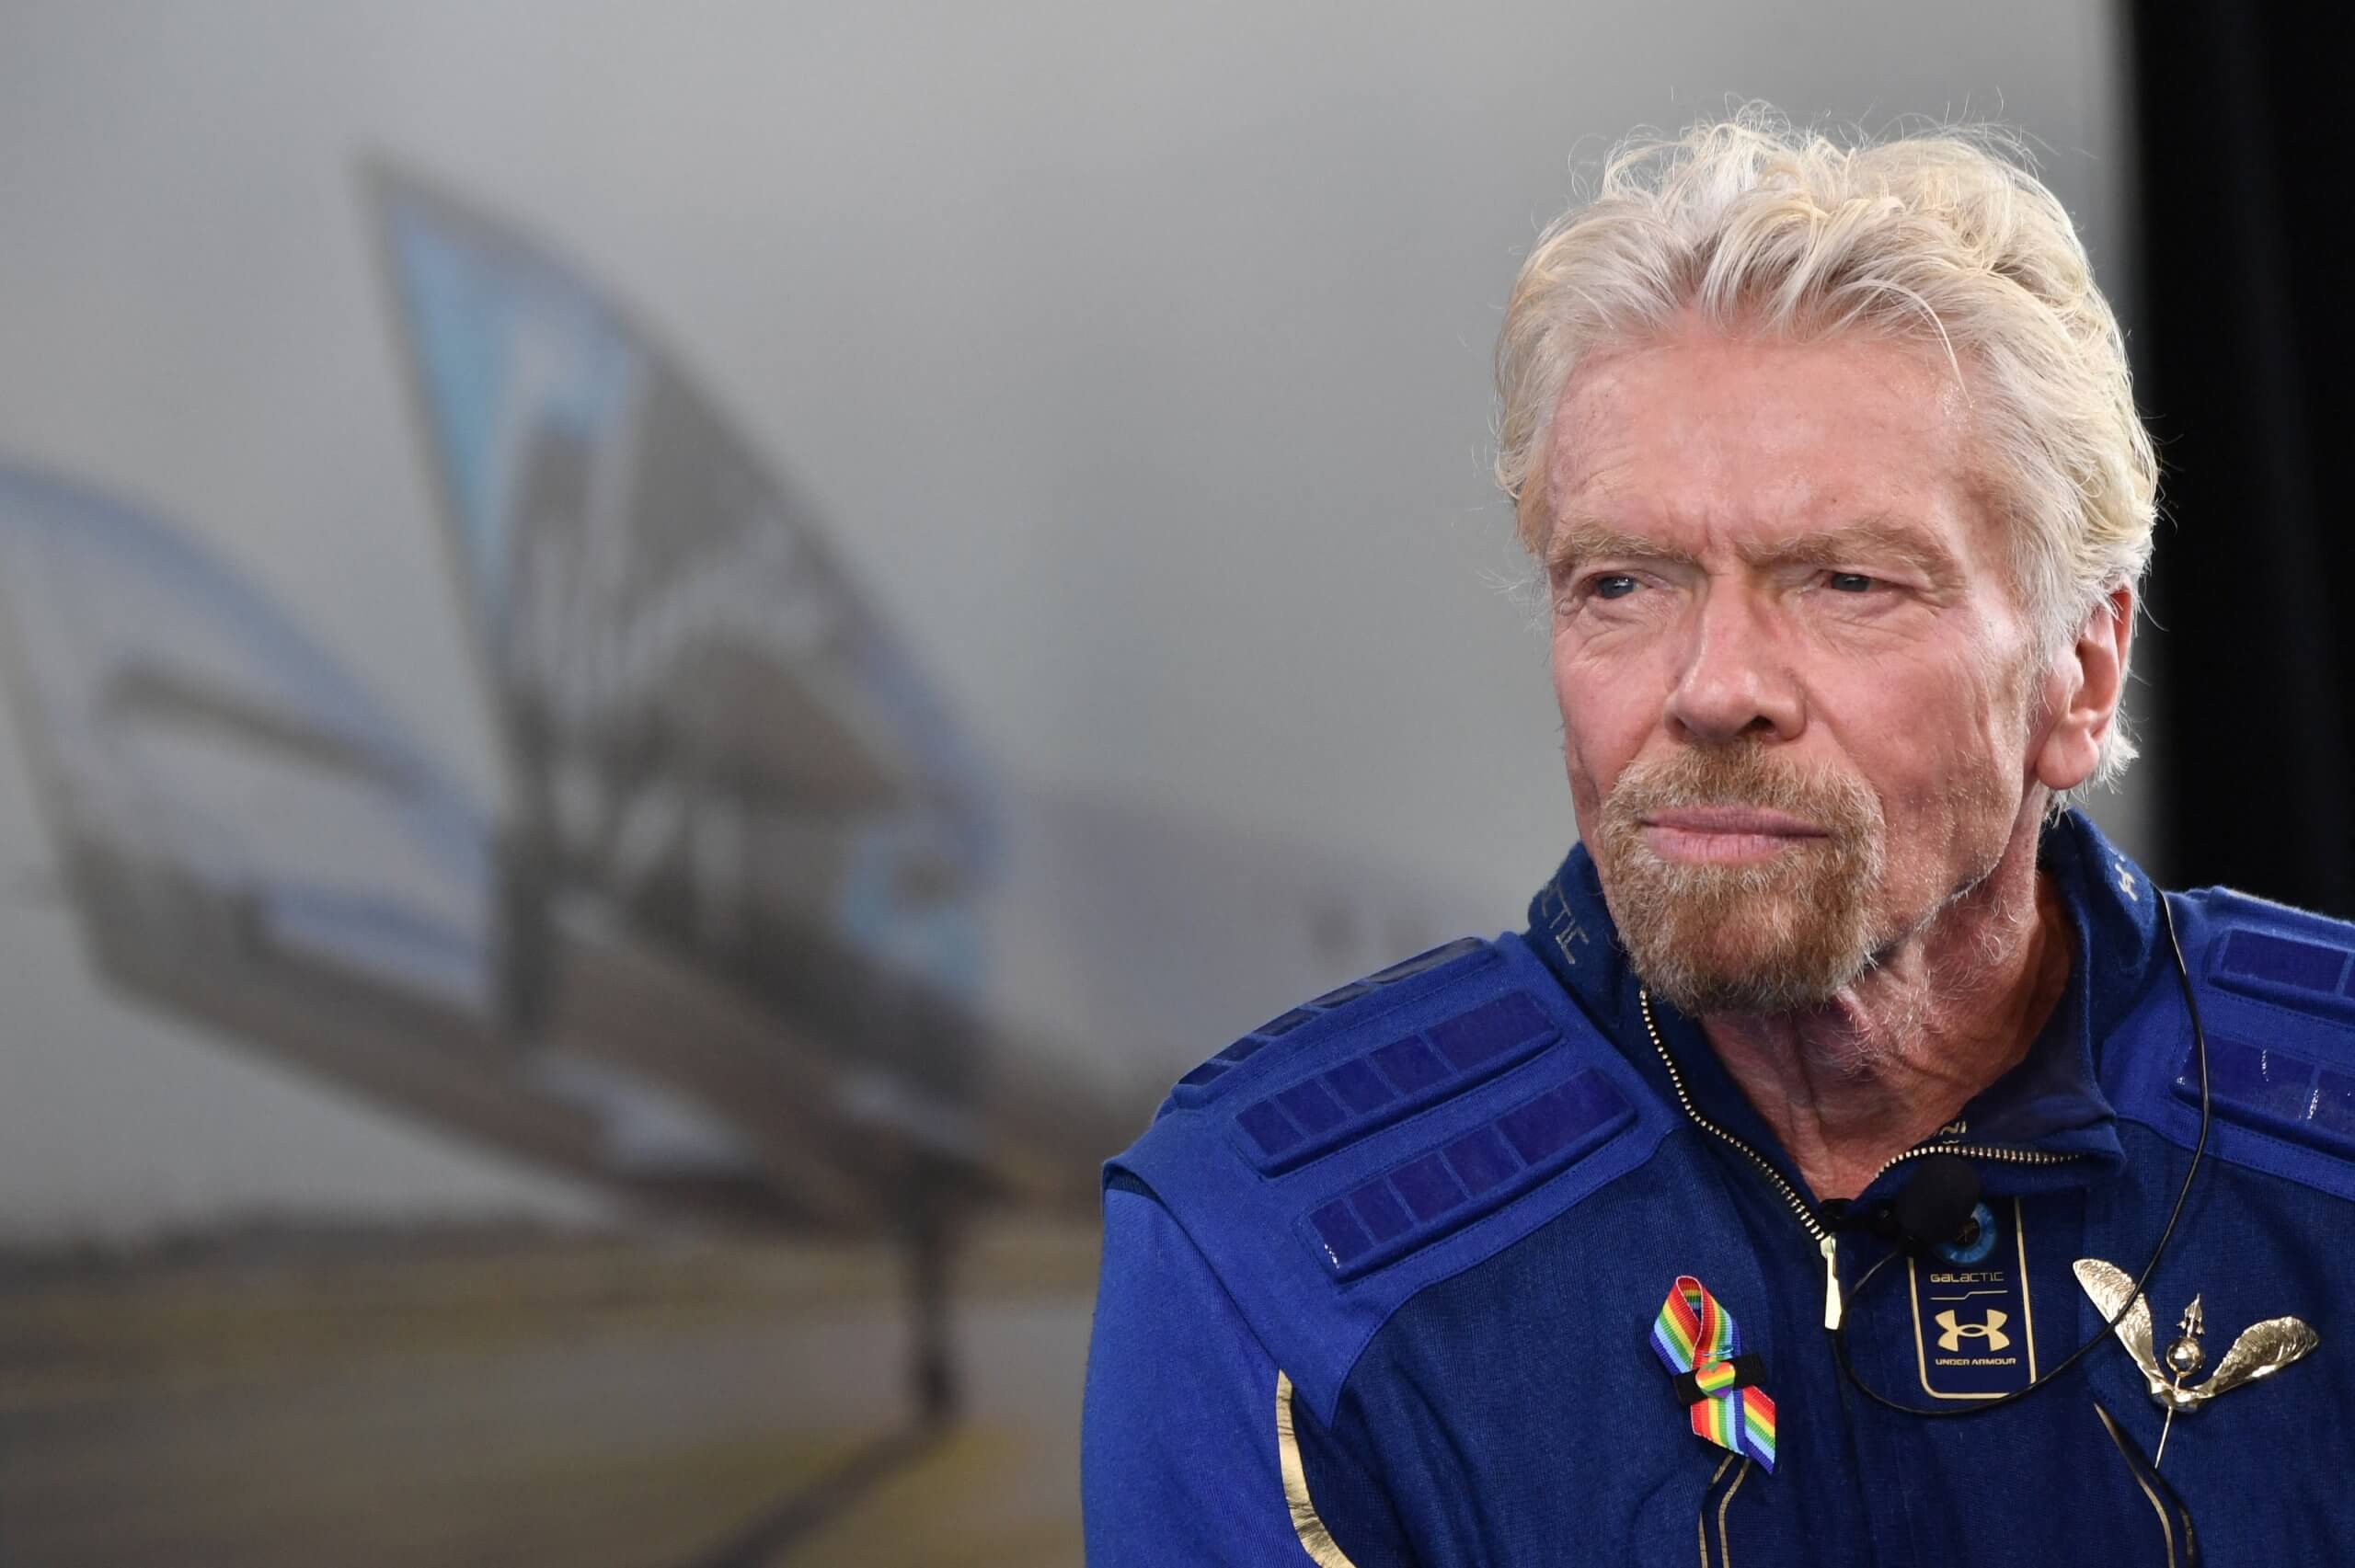 Sir Richard Branson speaks after he flew into space aboard a Virgin Galactic vessel, a voyage he described as the "experience of a lifetime" -- and one he hopes will usher in an era of lucrative space tourism